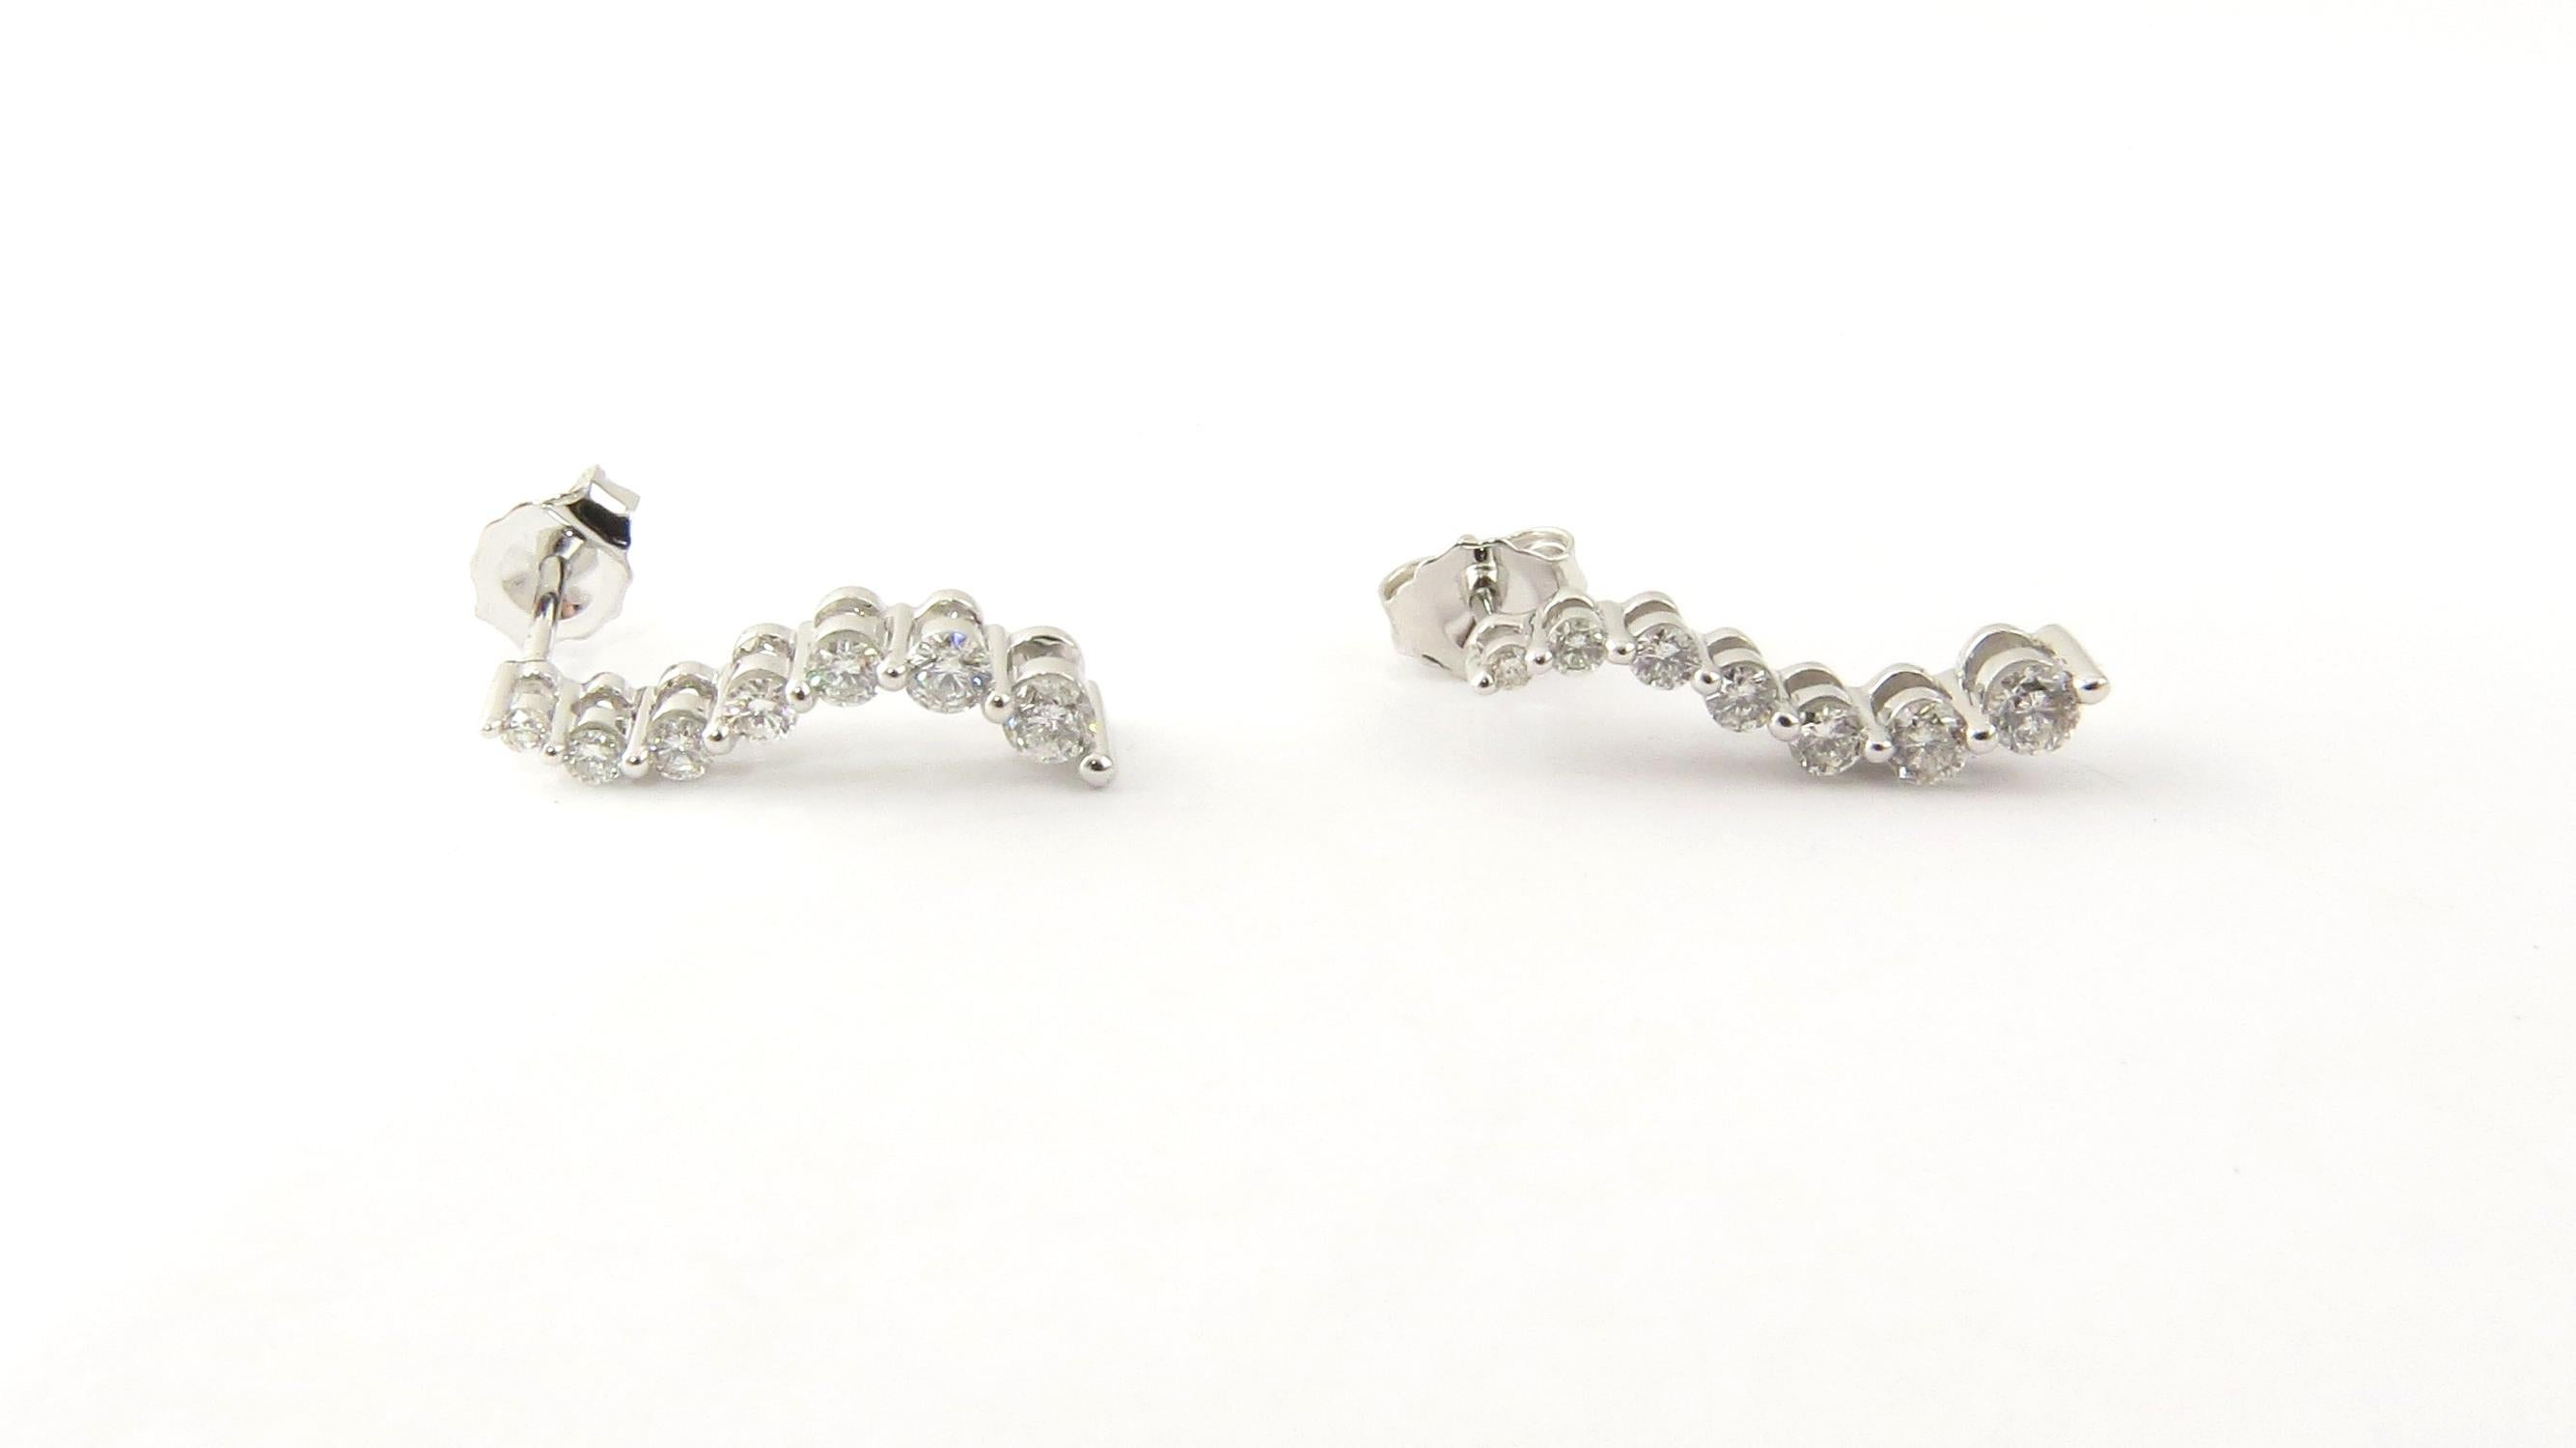 Vintage 14 Karat White Gold Graduated Diamond Earrings

These sparkling earrings each feature seven round brilliant cut diamonds set in a classic curved design. Push back closures.

Approximate total diamond weight: .39 ct.

Diamond color: